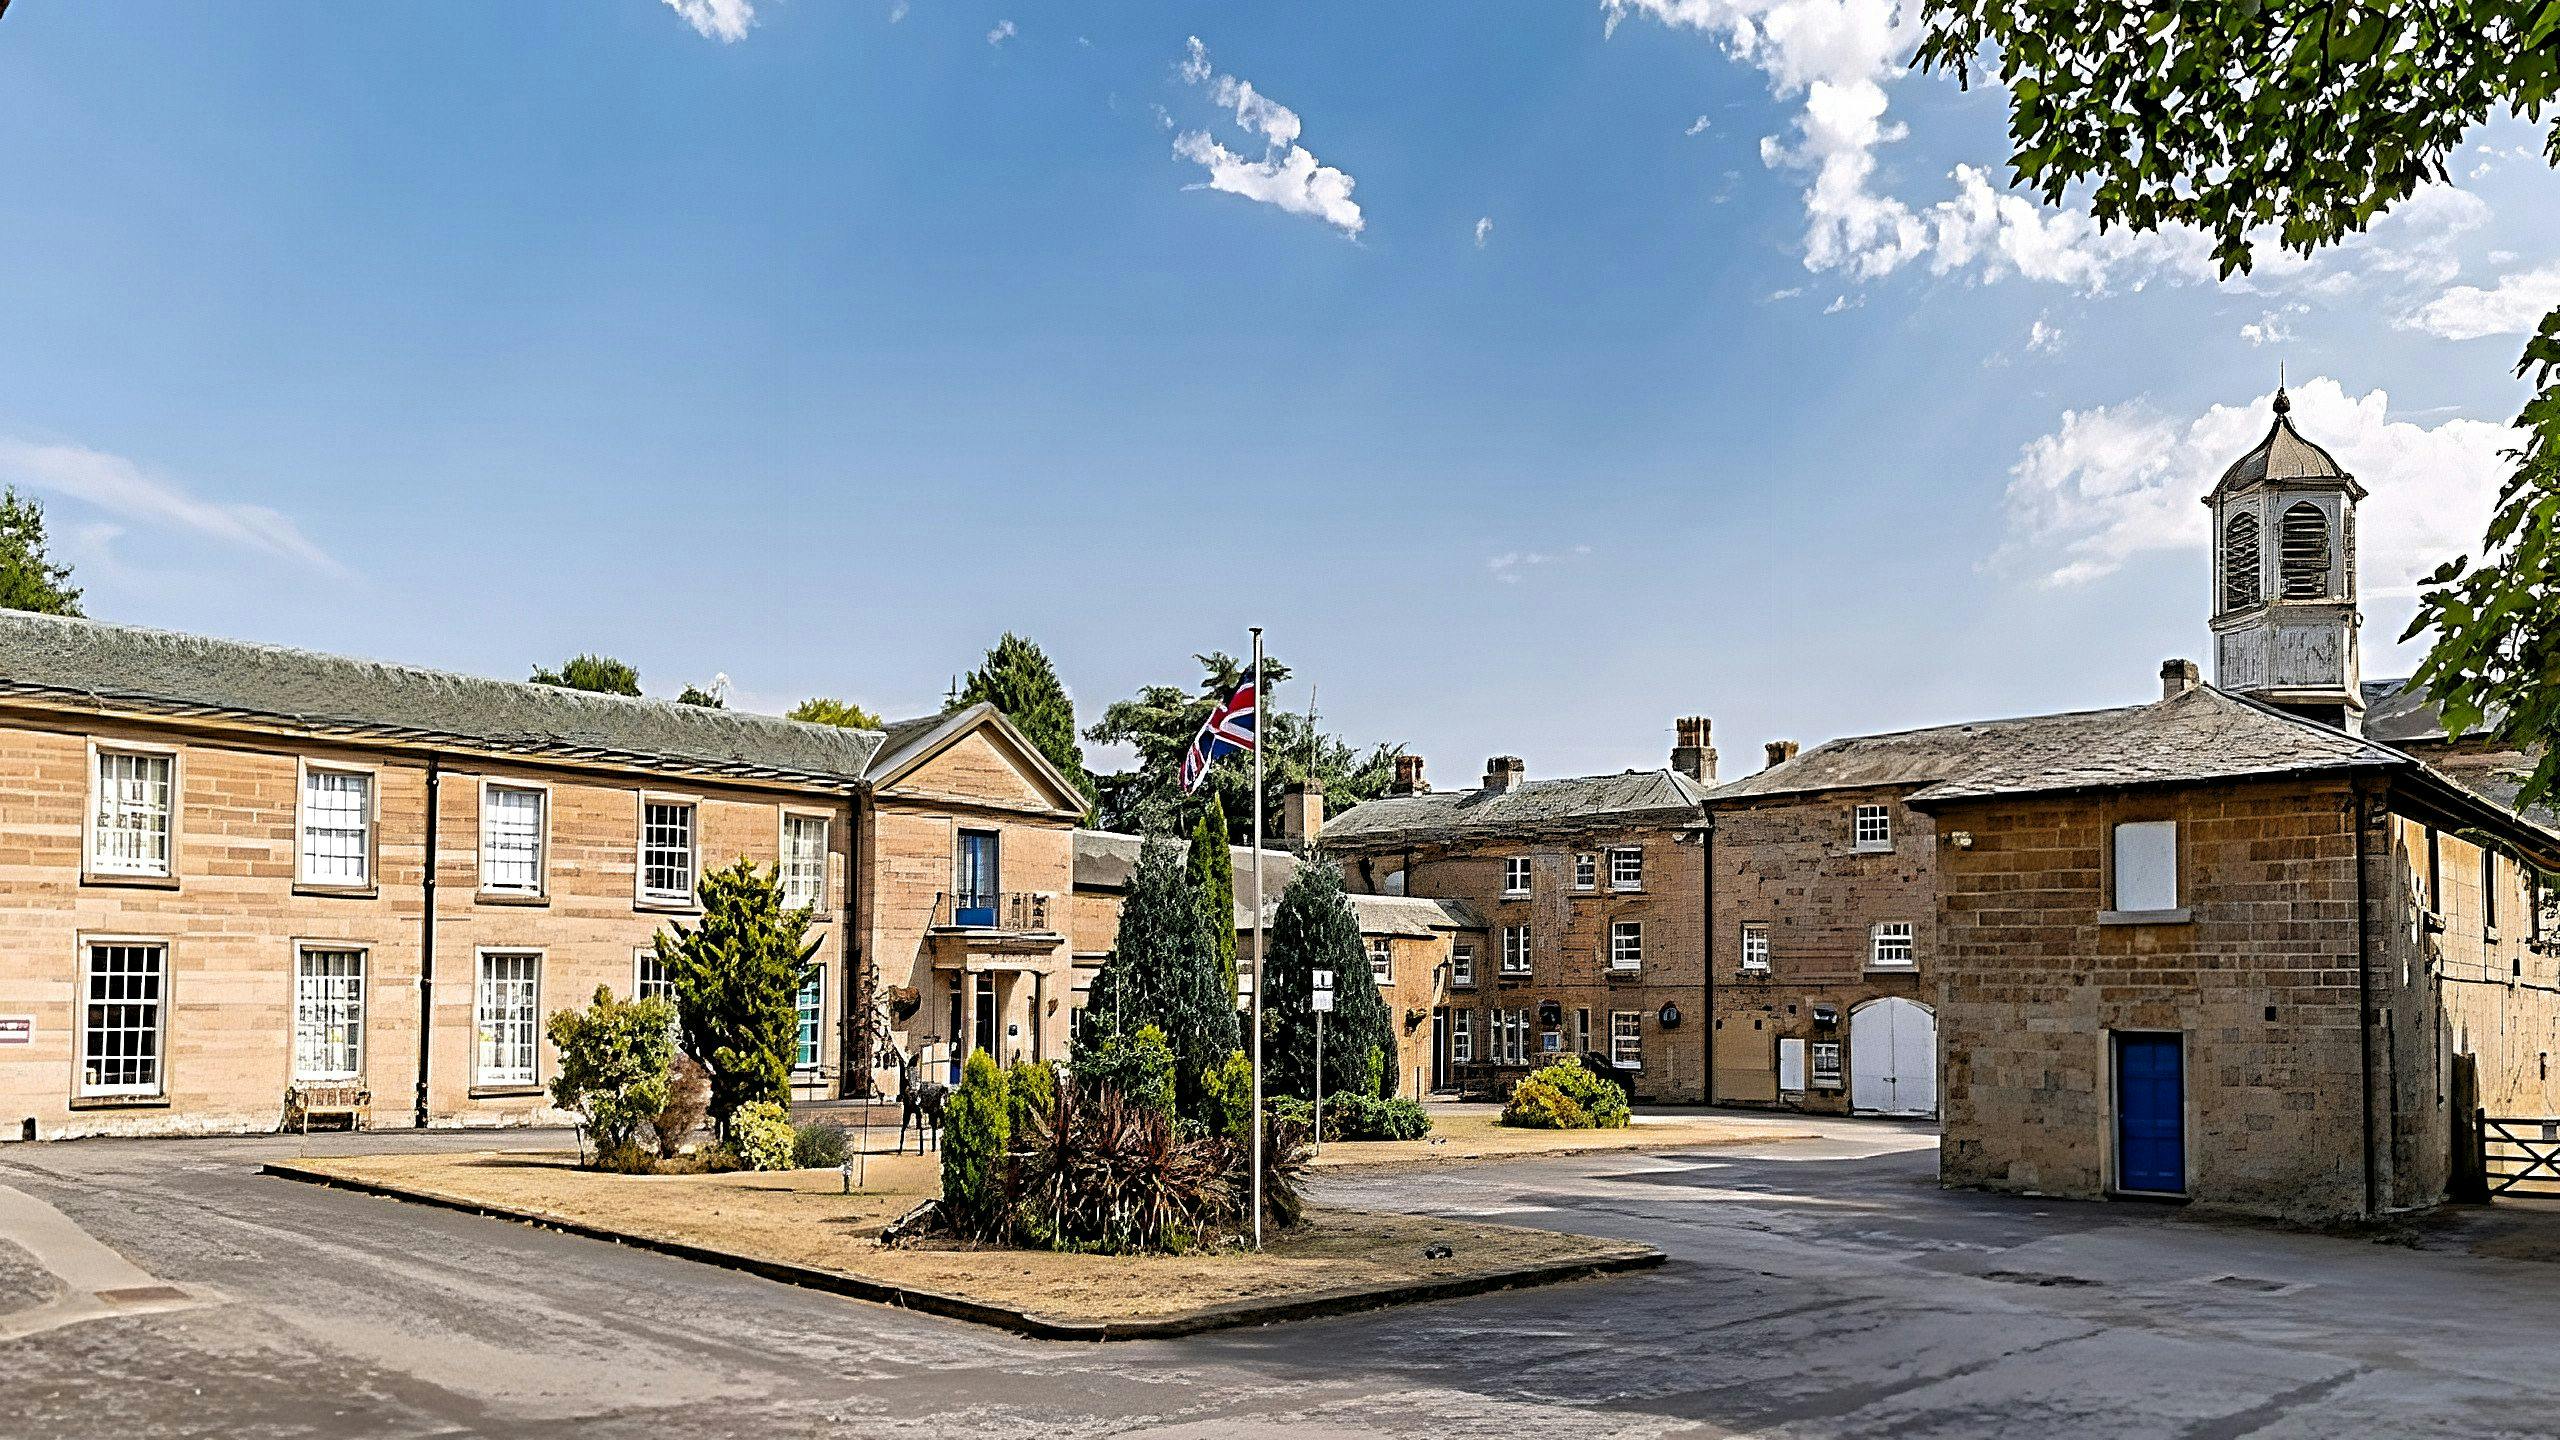 Countrywide - Gateford Hill care home 7